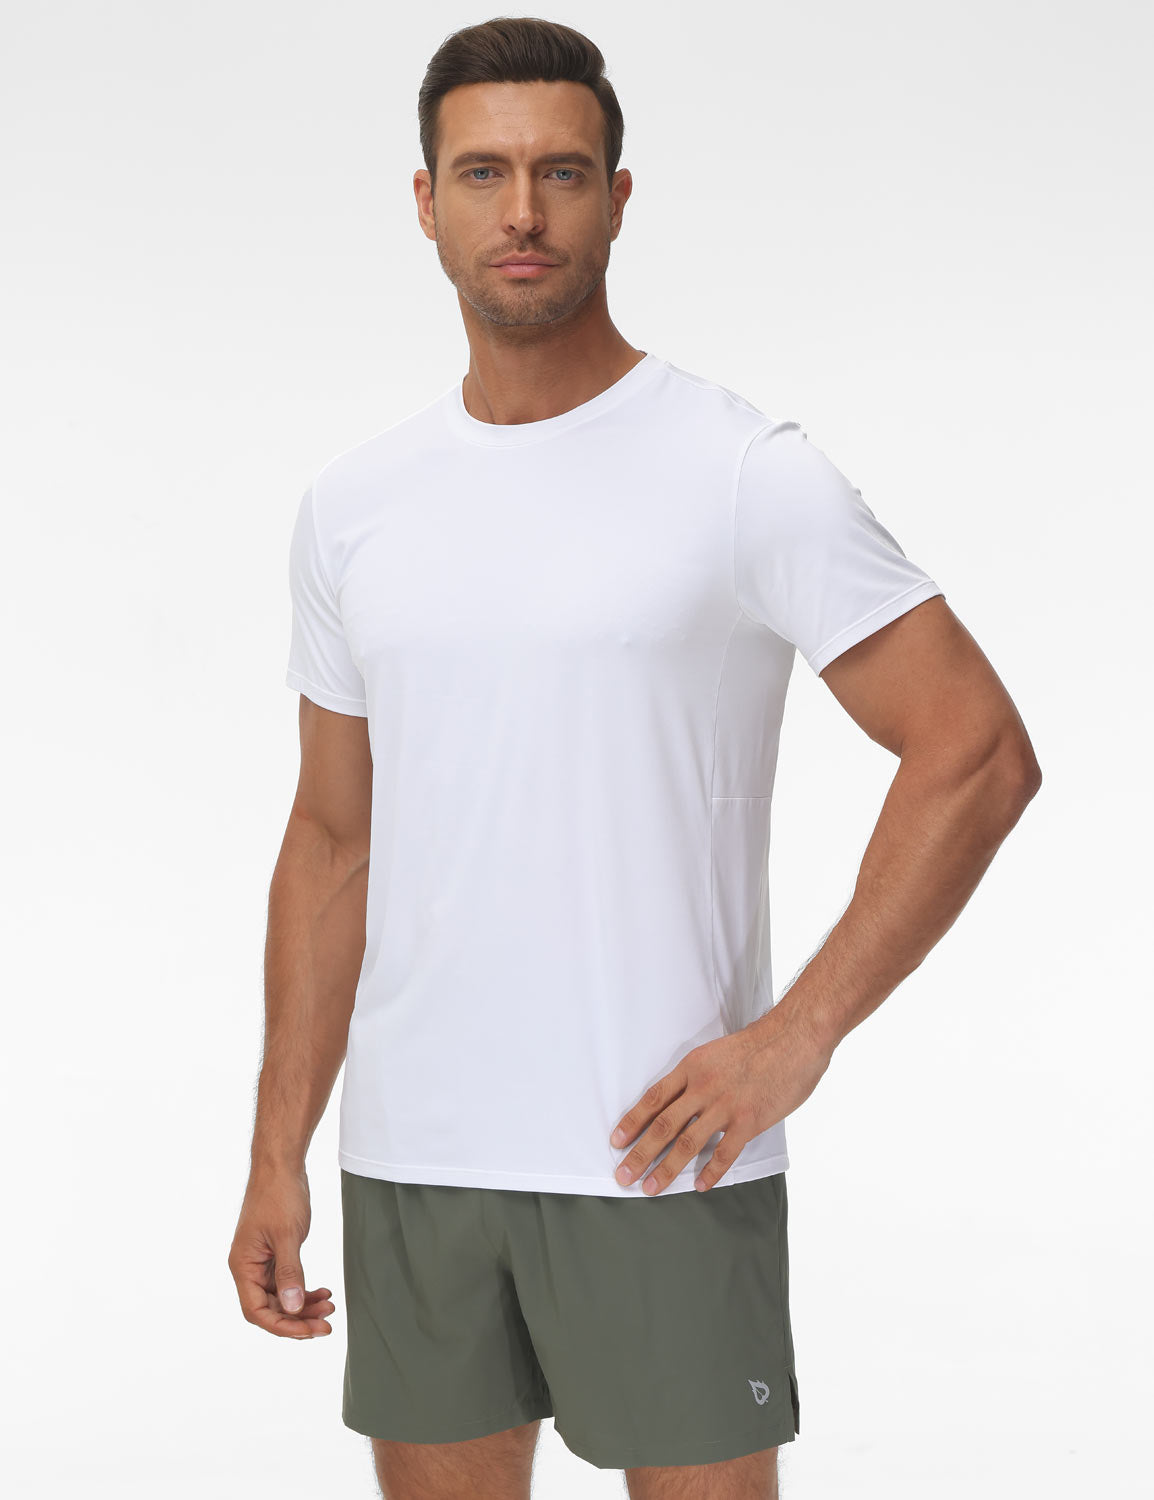 Baleaf Men's Fitted Crew Neck Short Sleeve T-shirts Lucent White Main